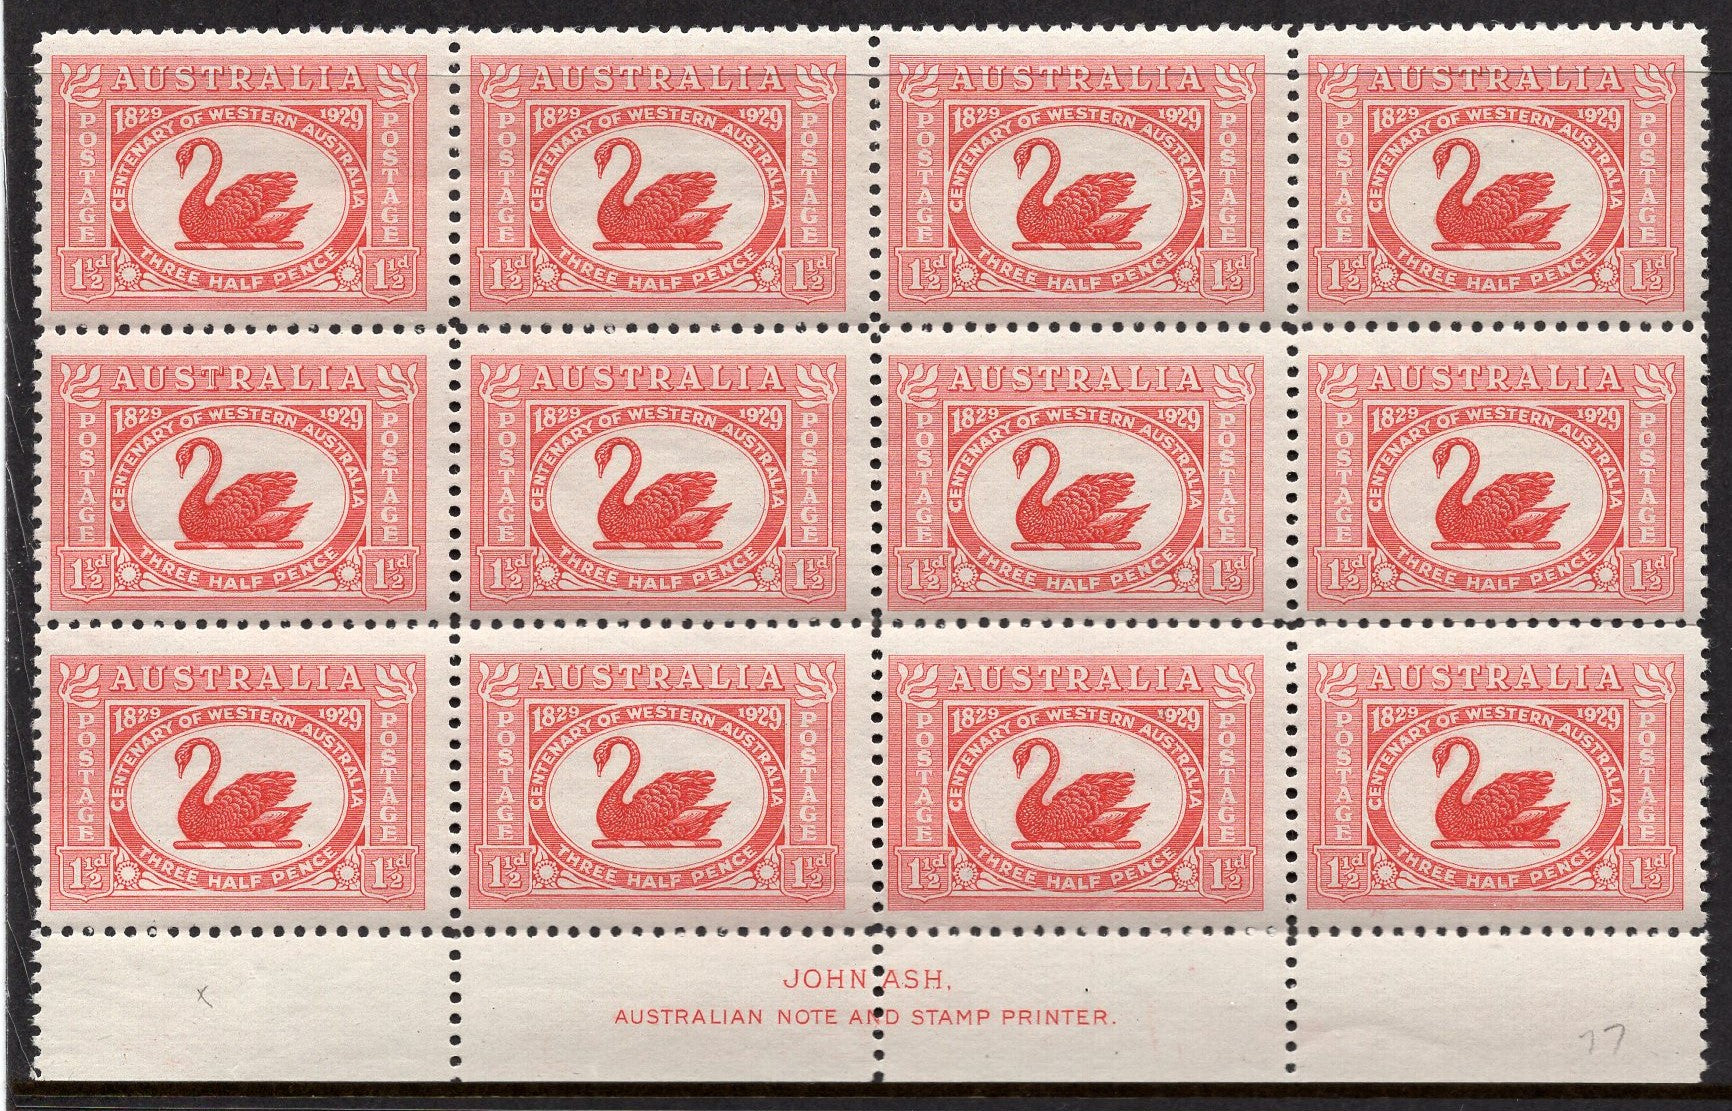 Australia SG 116a 1½d Swan Ash imprint block of 12 Stamps MUH re-entry